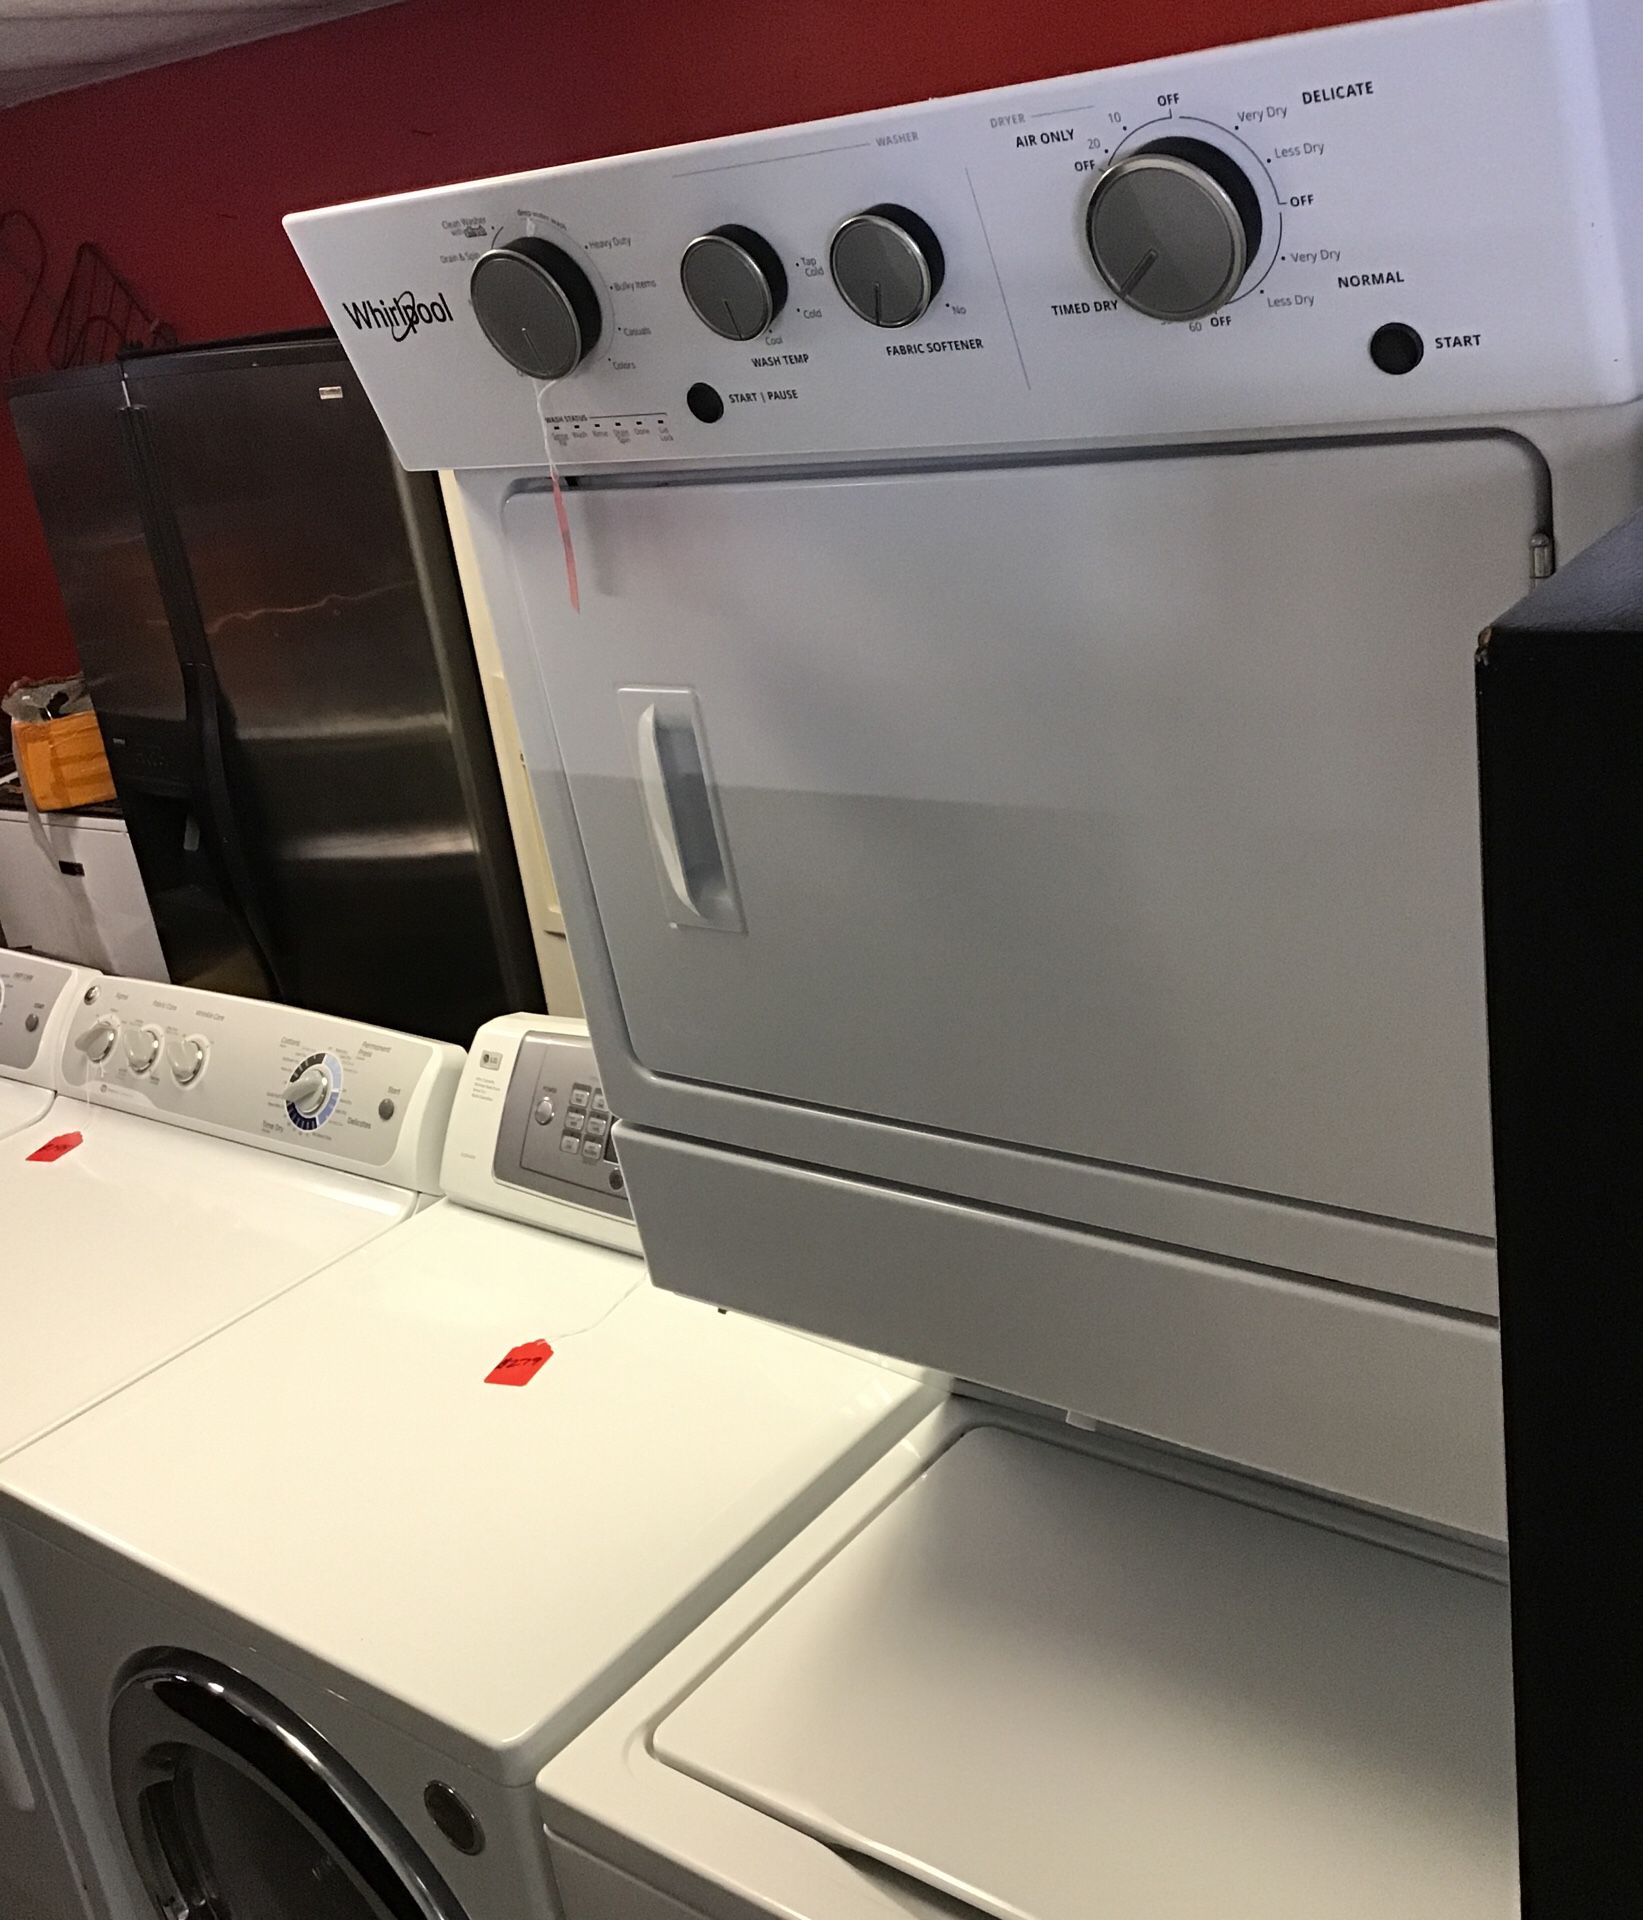 New scratch and dent whirlpool stackable washer and dryer. 1 year warranty